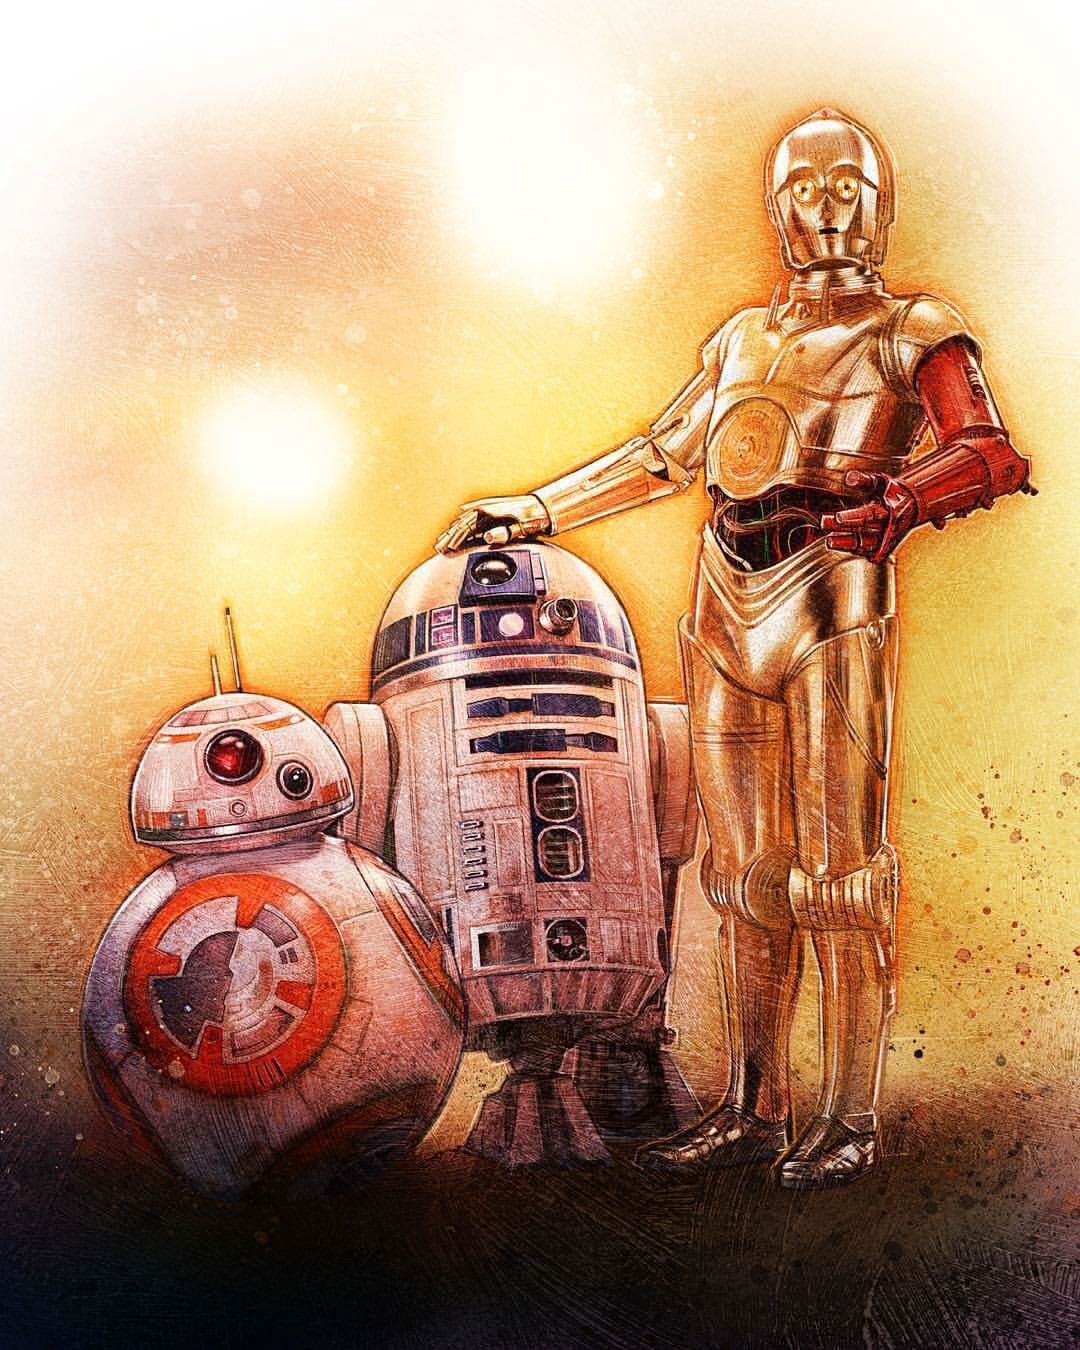 Star Wars: The Force Awakens by Paul Shipper